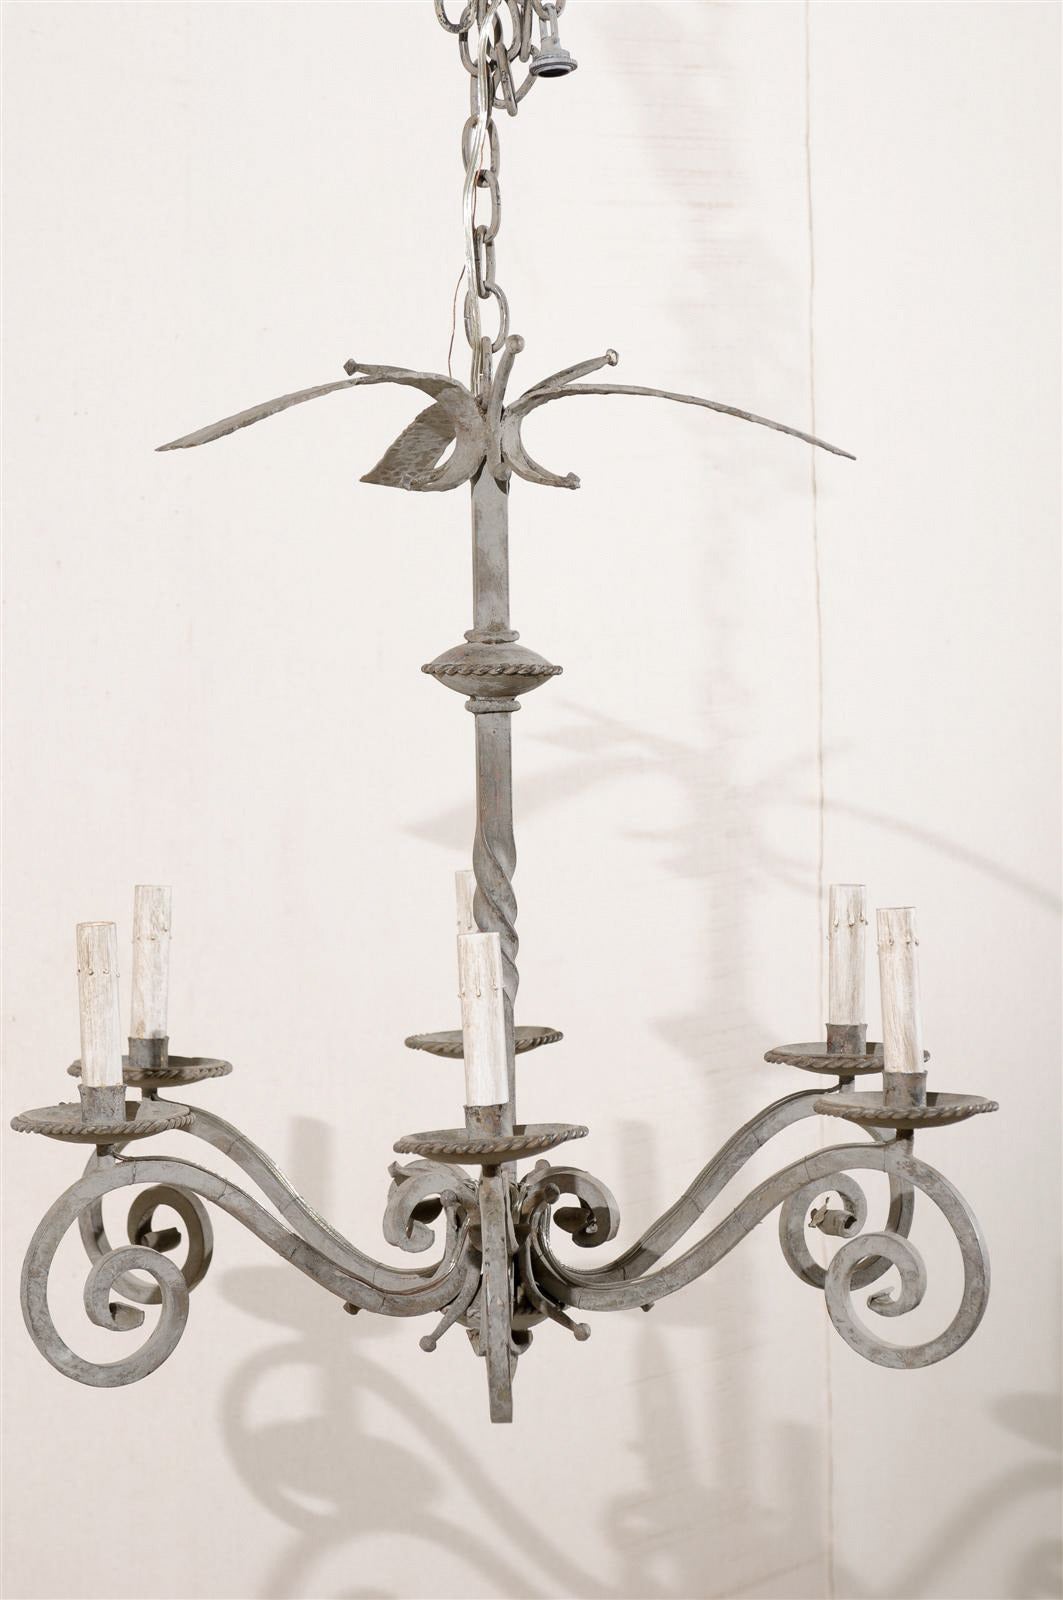 French Vintage Six-Light Light Grey Painted Iron Chandelier with Scrolled Arms For Sale 5